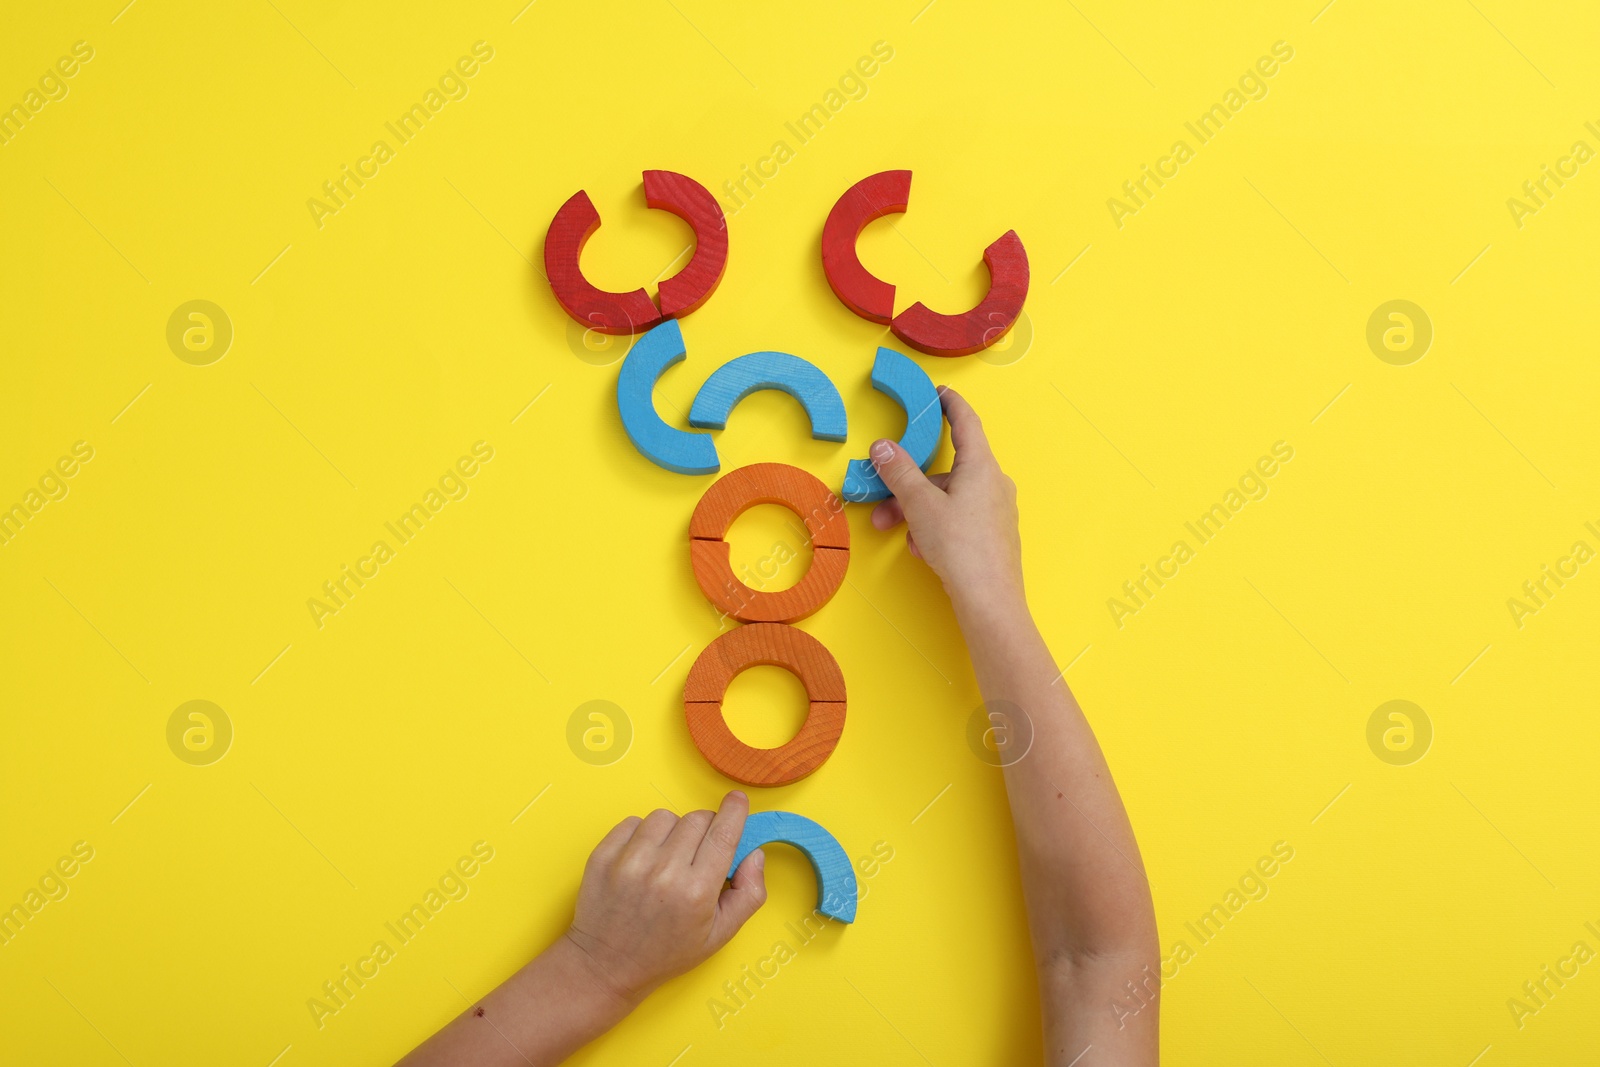 Photo of Motor skills development. Boy playing with colorful wooden arcs at yellow table, top view